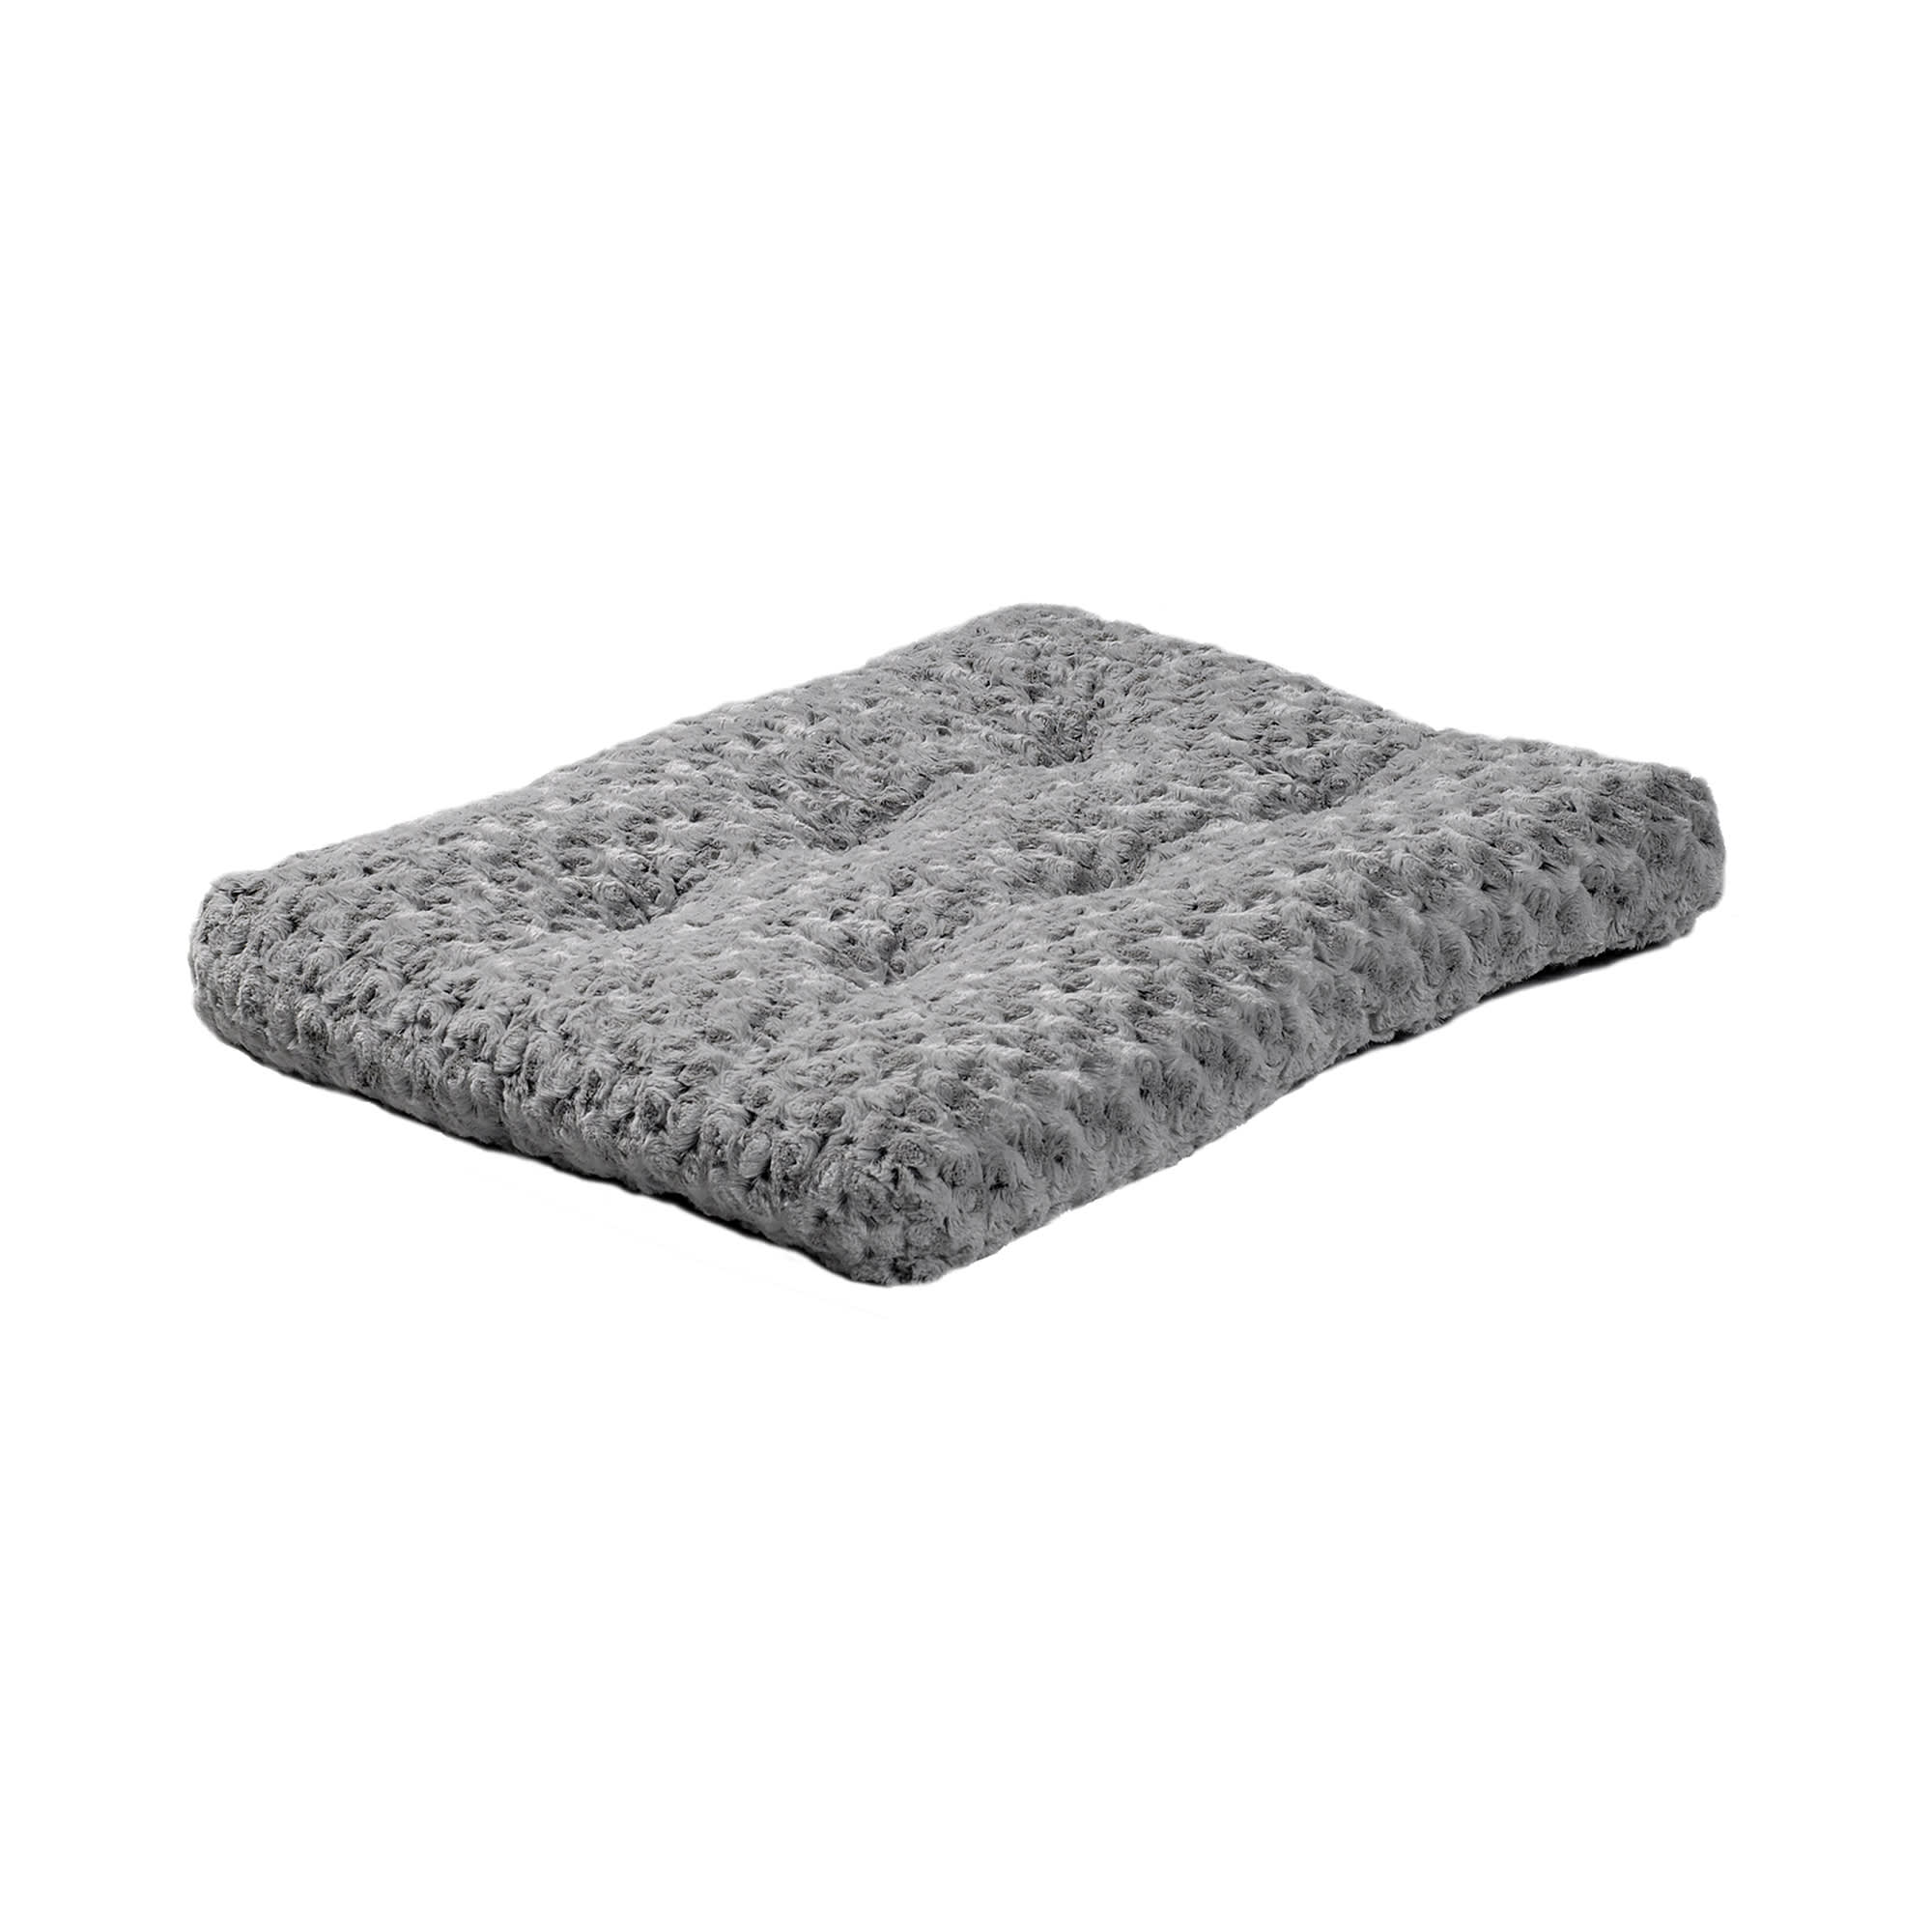 Photos - Dog Bed / Basket Midwest Quiet Time Ombre Gray Dog Bed, 22" L X 17" W, Small, Gray 